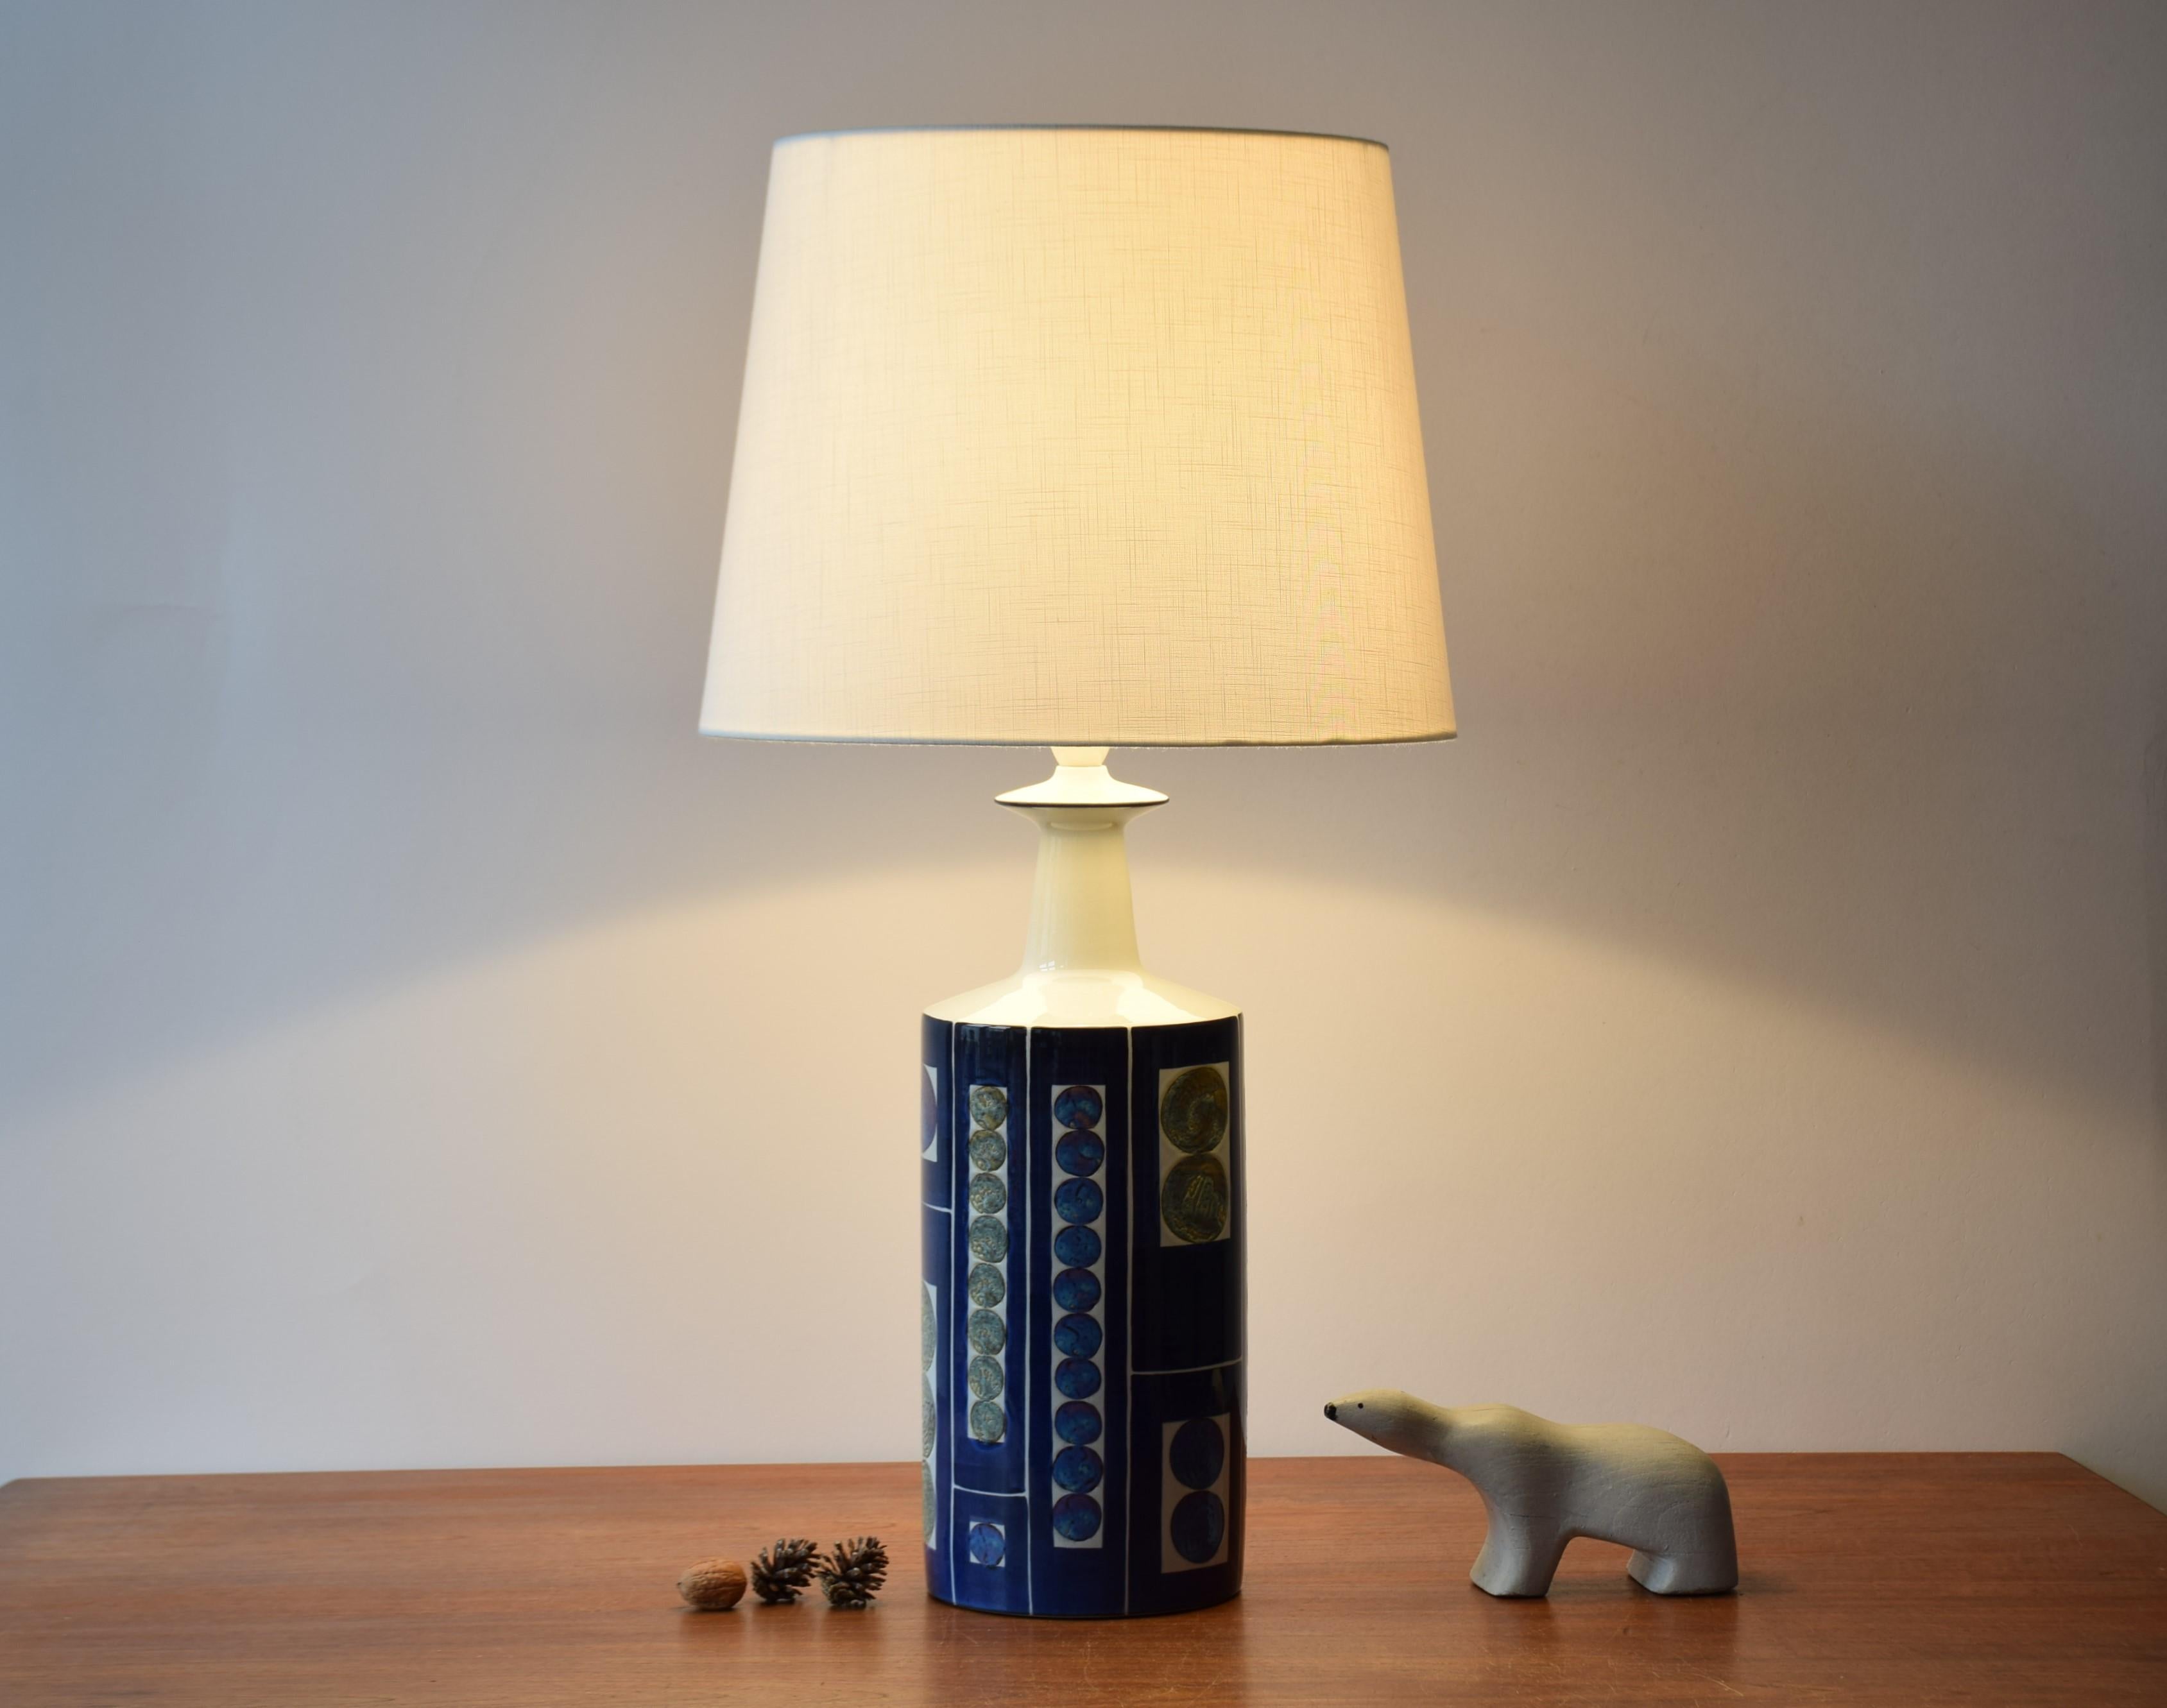 Mid-Century Modern Pair of Aluminia Tall Table Lamps by Inge-Lise Koefoed, Danish Ceramic 1960s For Sale